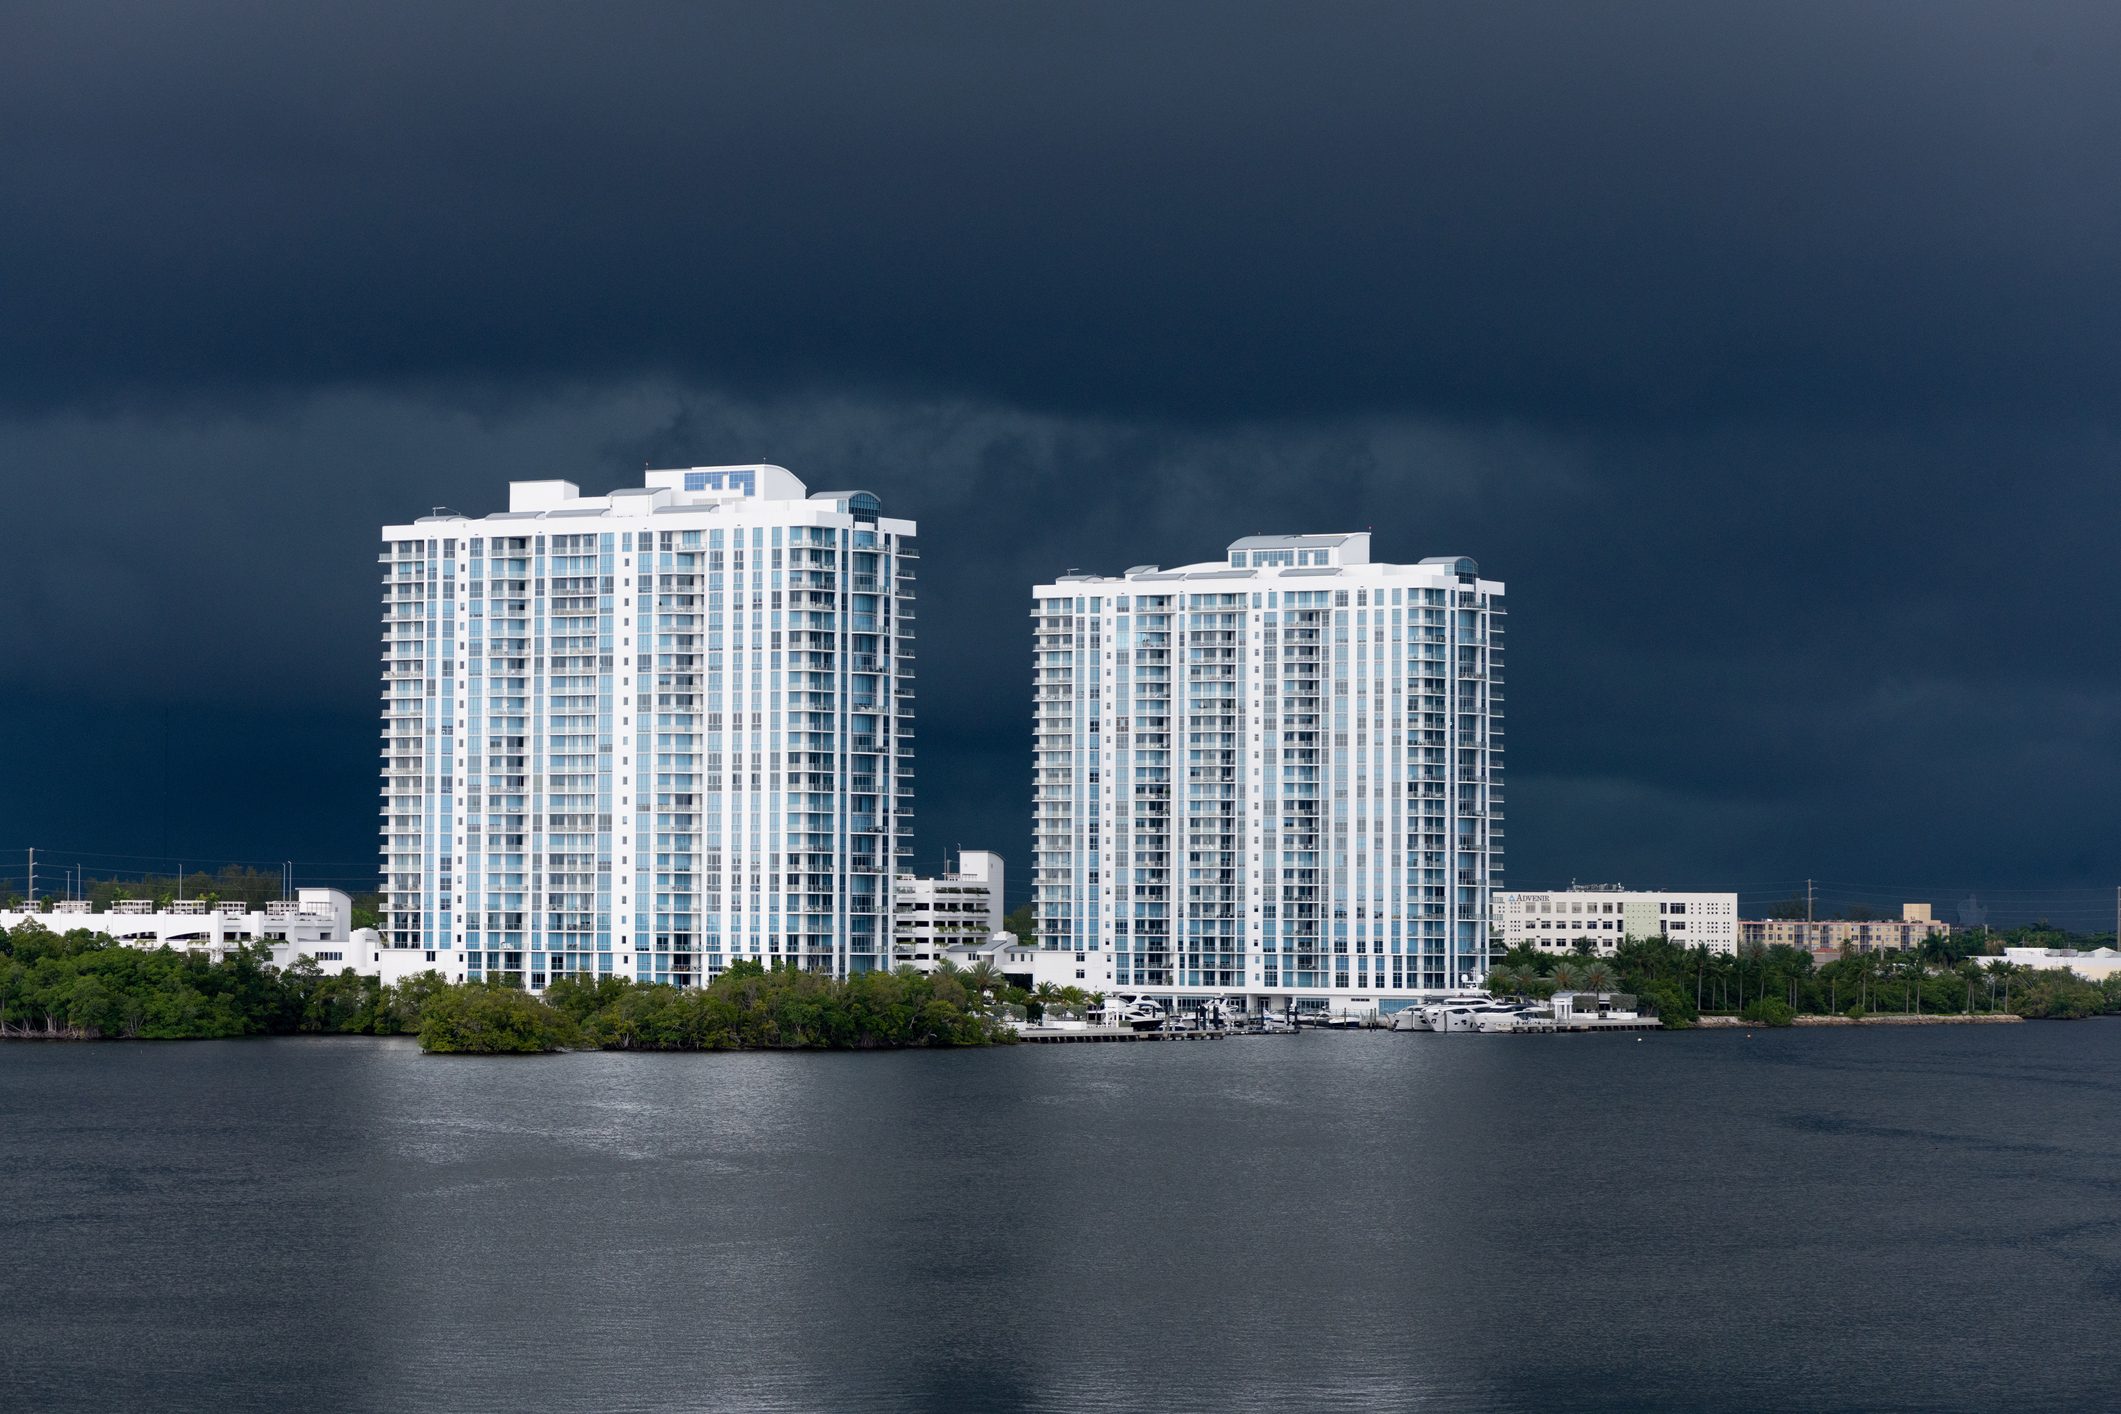 North Miami Beach Luxury High Rise Buildings with Storm Clouds